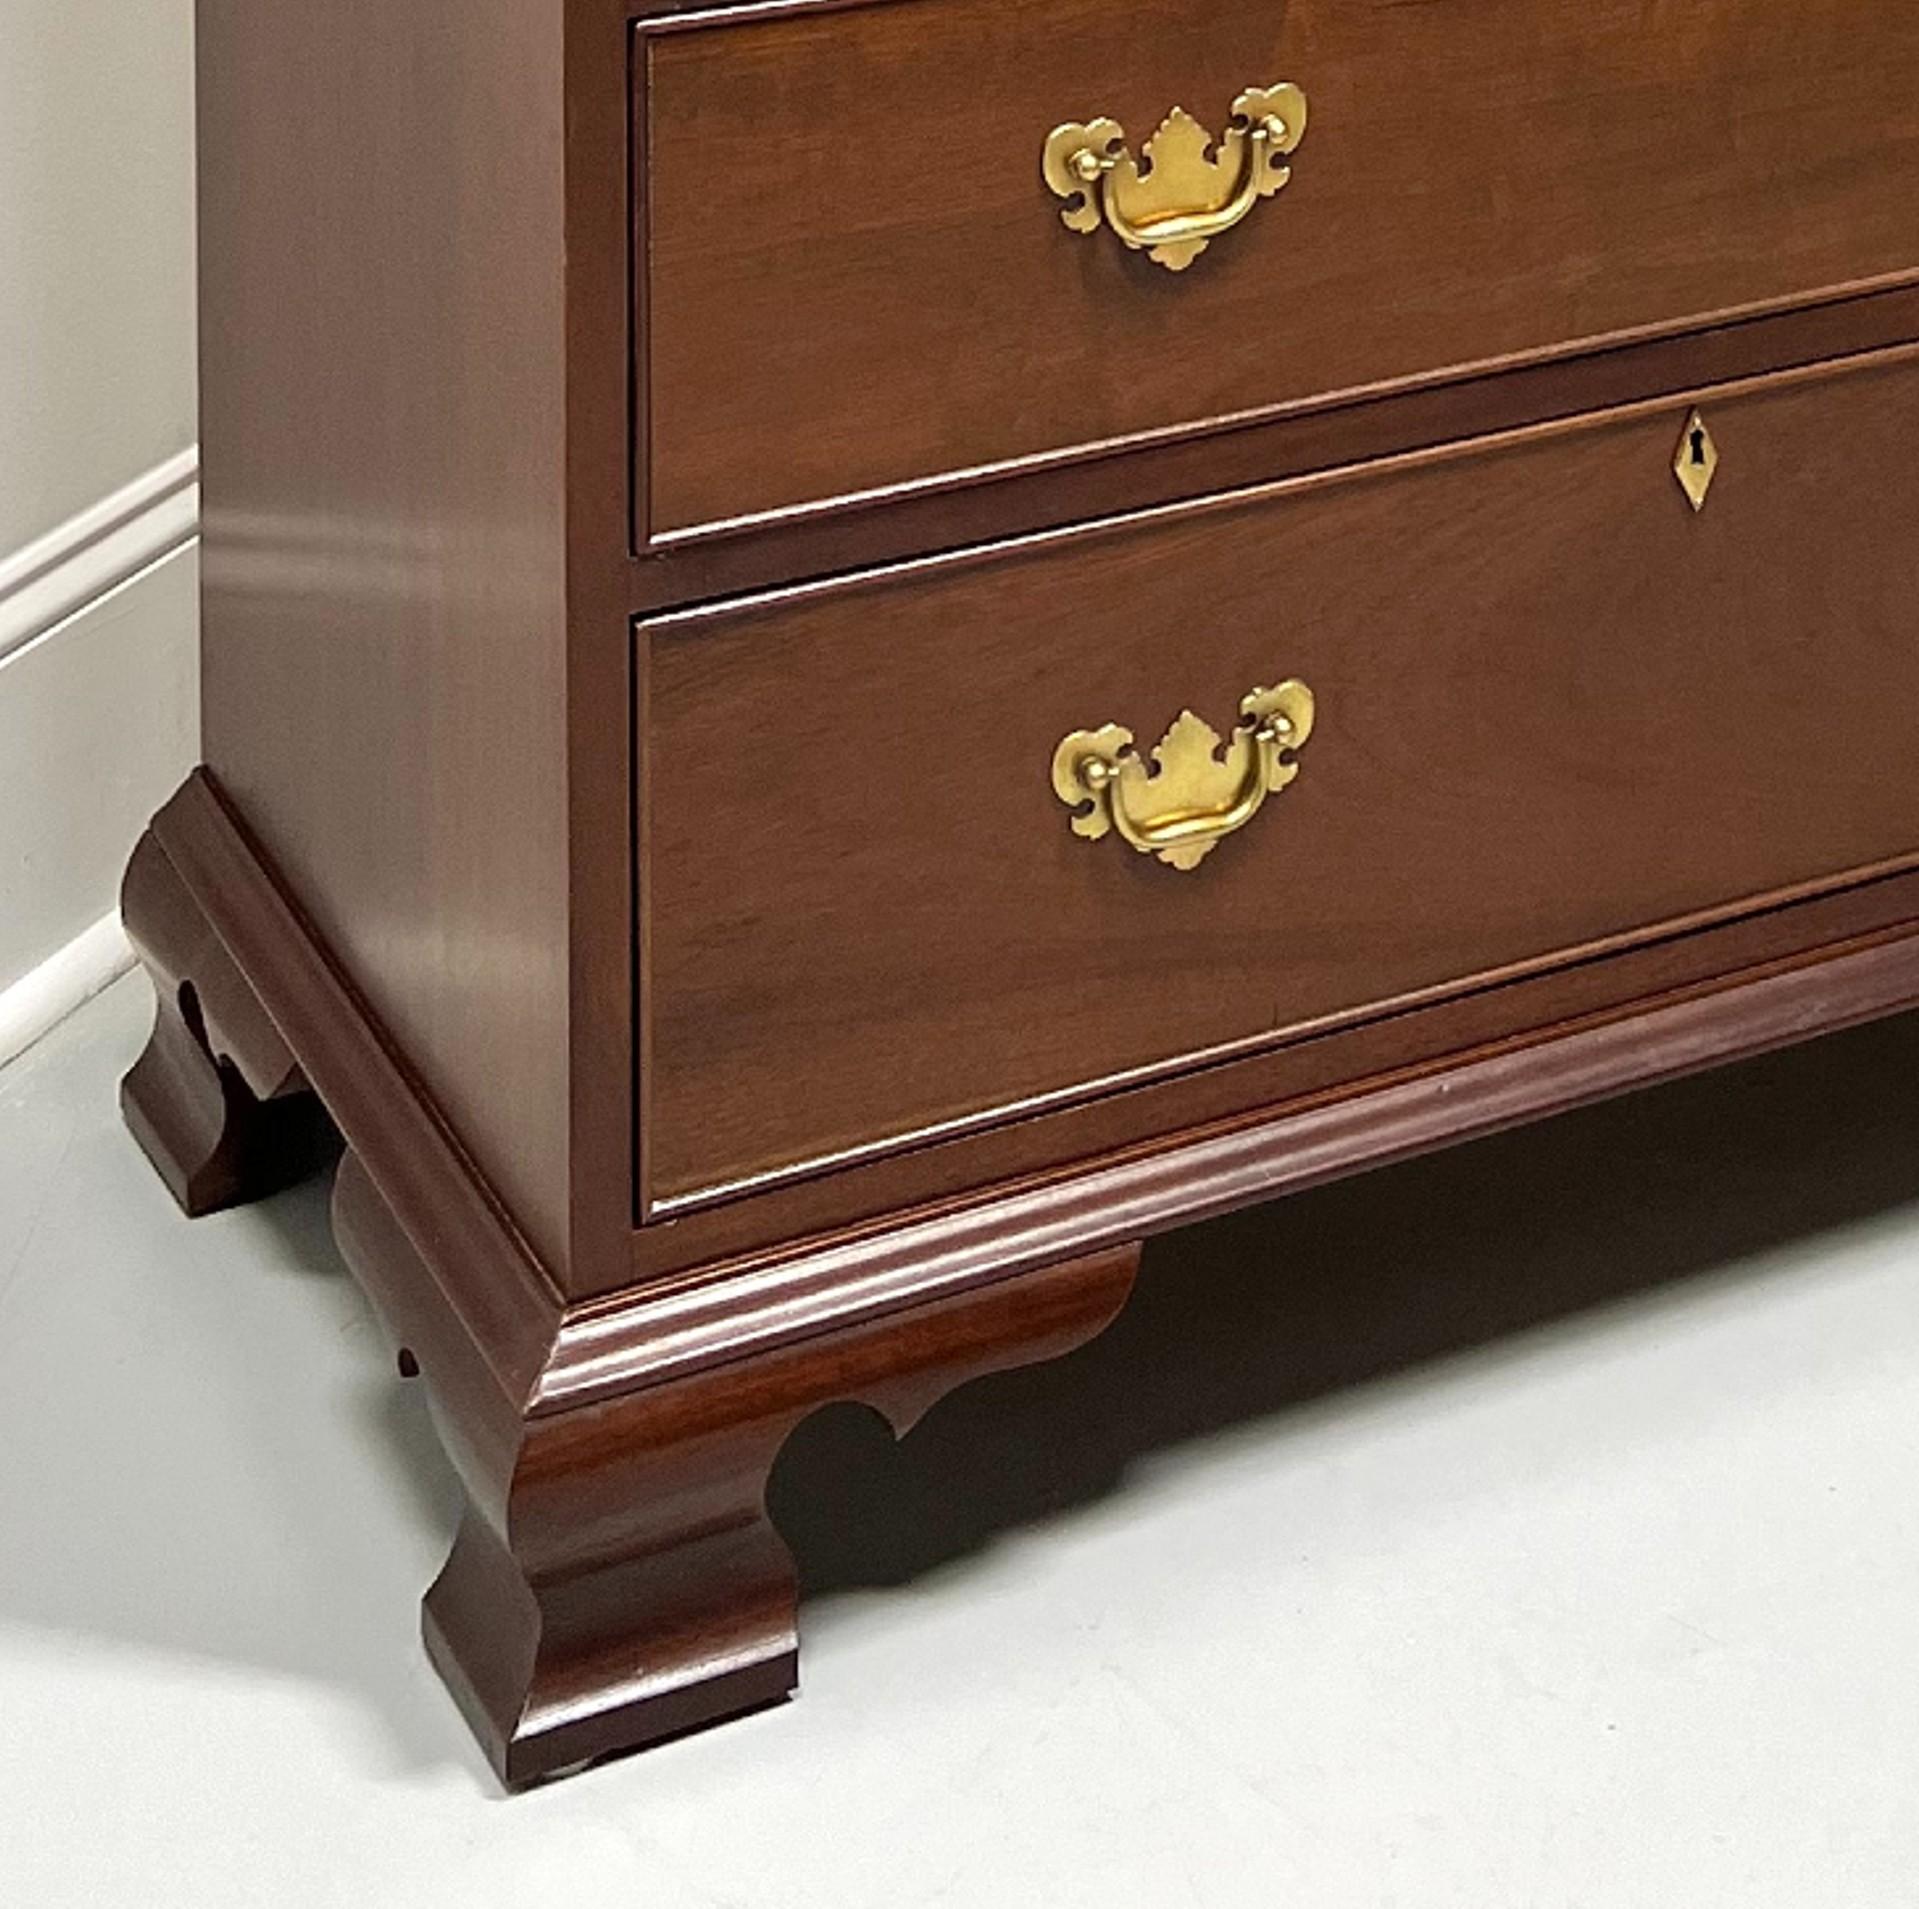 CRAFTIQUE Solid Mahogany Chippendale Ten-Drawer Triple Dresser w/ Ogee Feet 3